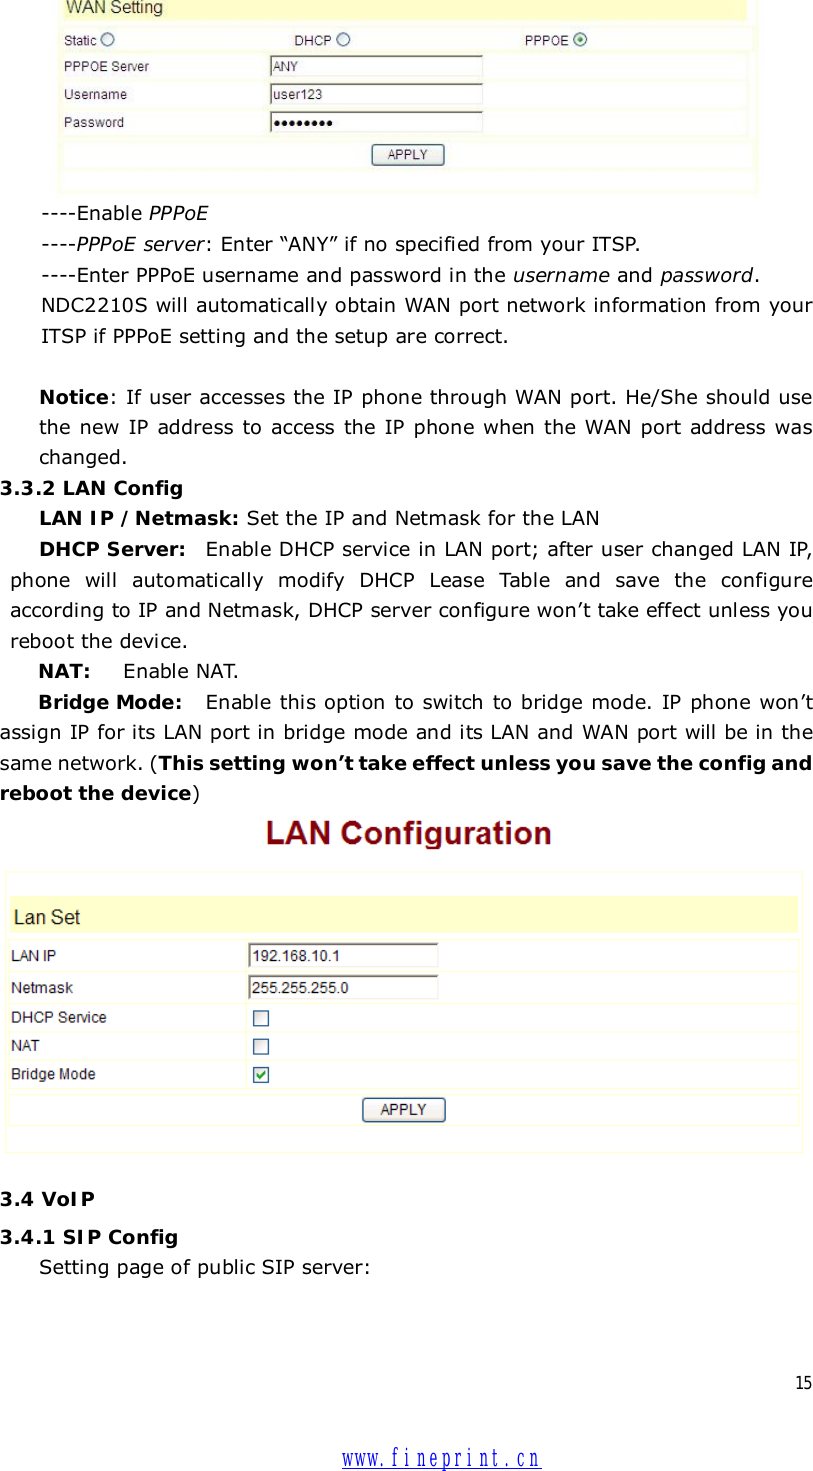  15   ----Enable PPPoE   ----PPPoE server: Enter “ANY” if no specified from your ITSP.  ----Enter PPPoE username and password in the username and password. NDC2210S will automatically obtain WAN port network information from your ITSP if PPPoE setting and the setup are correct.   Notice: If user accesses the IP phone through WAN port. He/She should use the new IP address to access the IP phone when the WAN port address was changed.  3.3.2 LAN Config LAN IP /Netmask: Set the IP and Netmask for the LAN DHCP Server: Enable DHCP service in LAN port; after user changed LAN IP, phone will automatically modify DHCP Lease Table and save the configure according to IP and Netmask, DHCP server configure won’t take effect unless you reboot the device. NAT:  Enable NAT. Bridge Mode:  Enable this option to switch to bridge mode. IP phone won’t assign IP for its LAN port in bridge mode and its LAN and WAN port will be in the same network. (This setting won’t take effect unless you save the config and reboot the device)  3.4 VoIP 3.4.1 SIP Config Setting page of public SIP server:  www.fineprint.cn